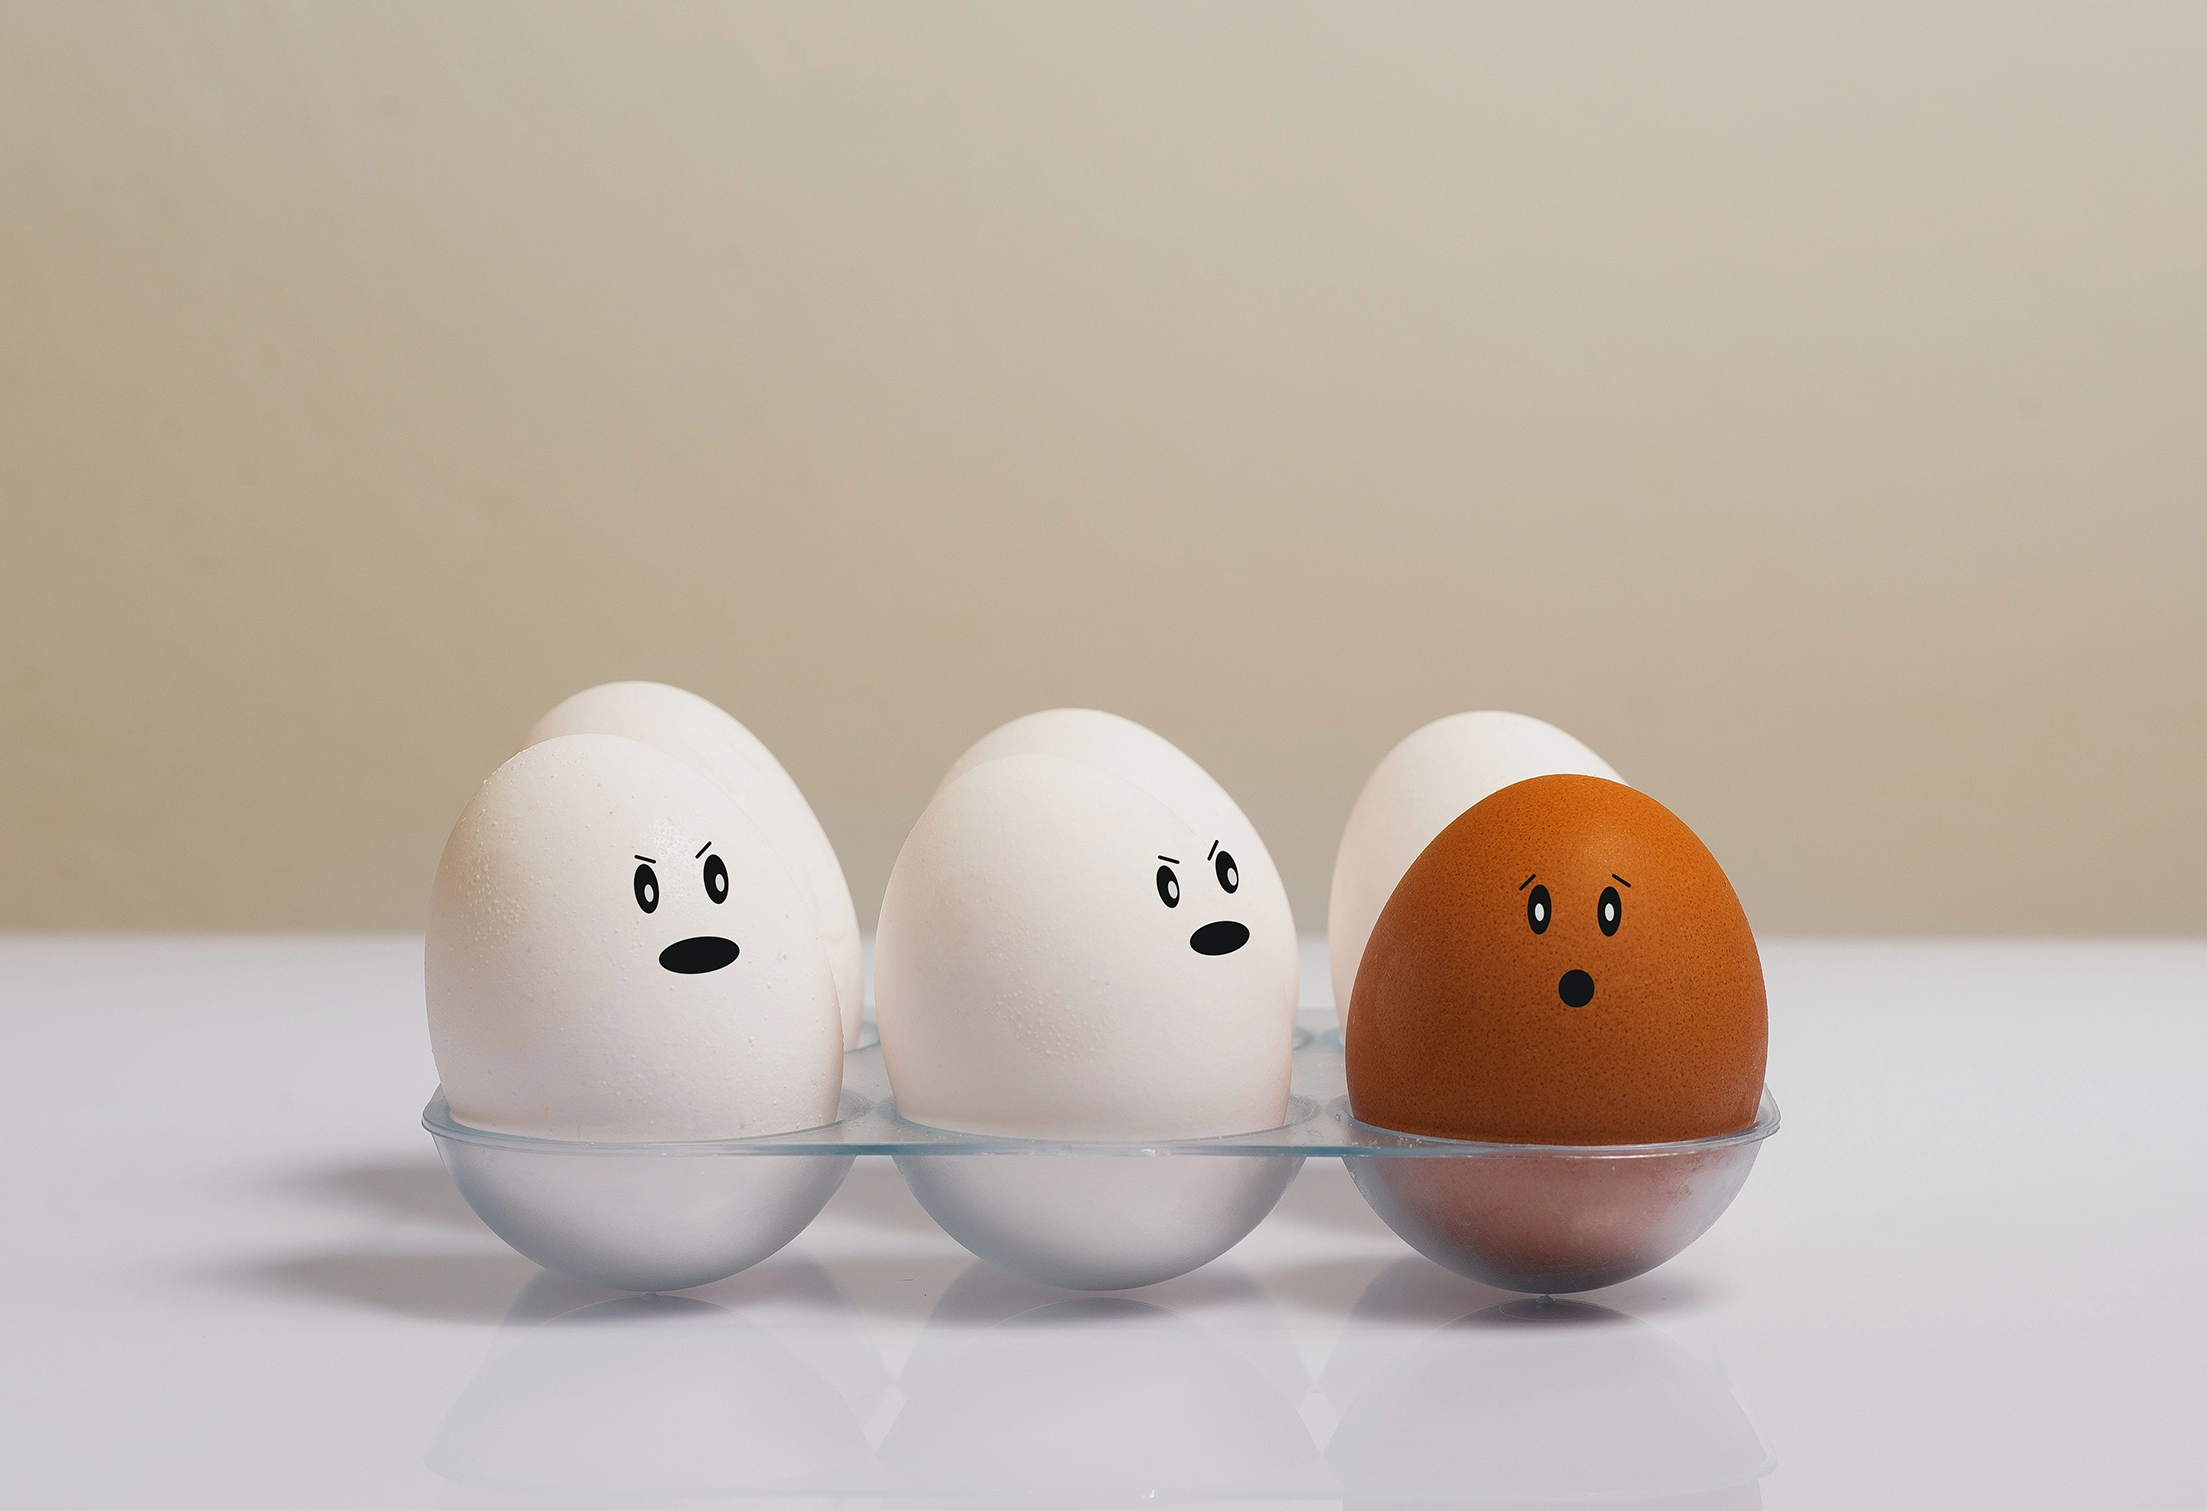 image of one brown egg among white ones representing discrimination